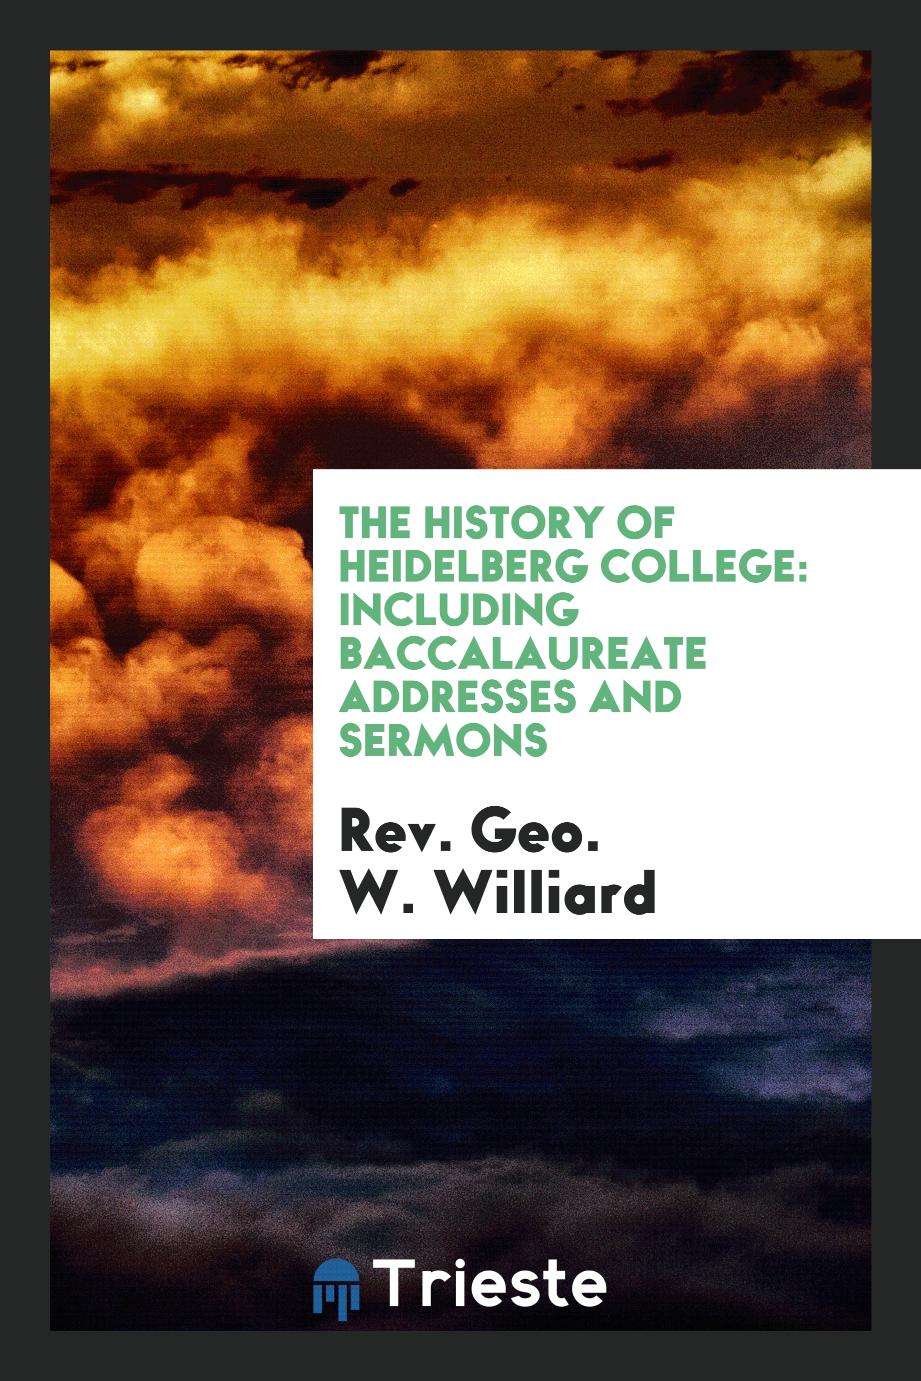 The History of Heidelberg College: Including Baccalaureate Addresses and Sermons